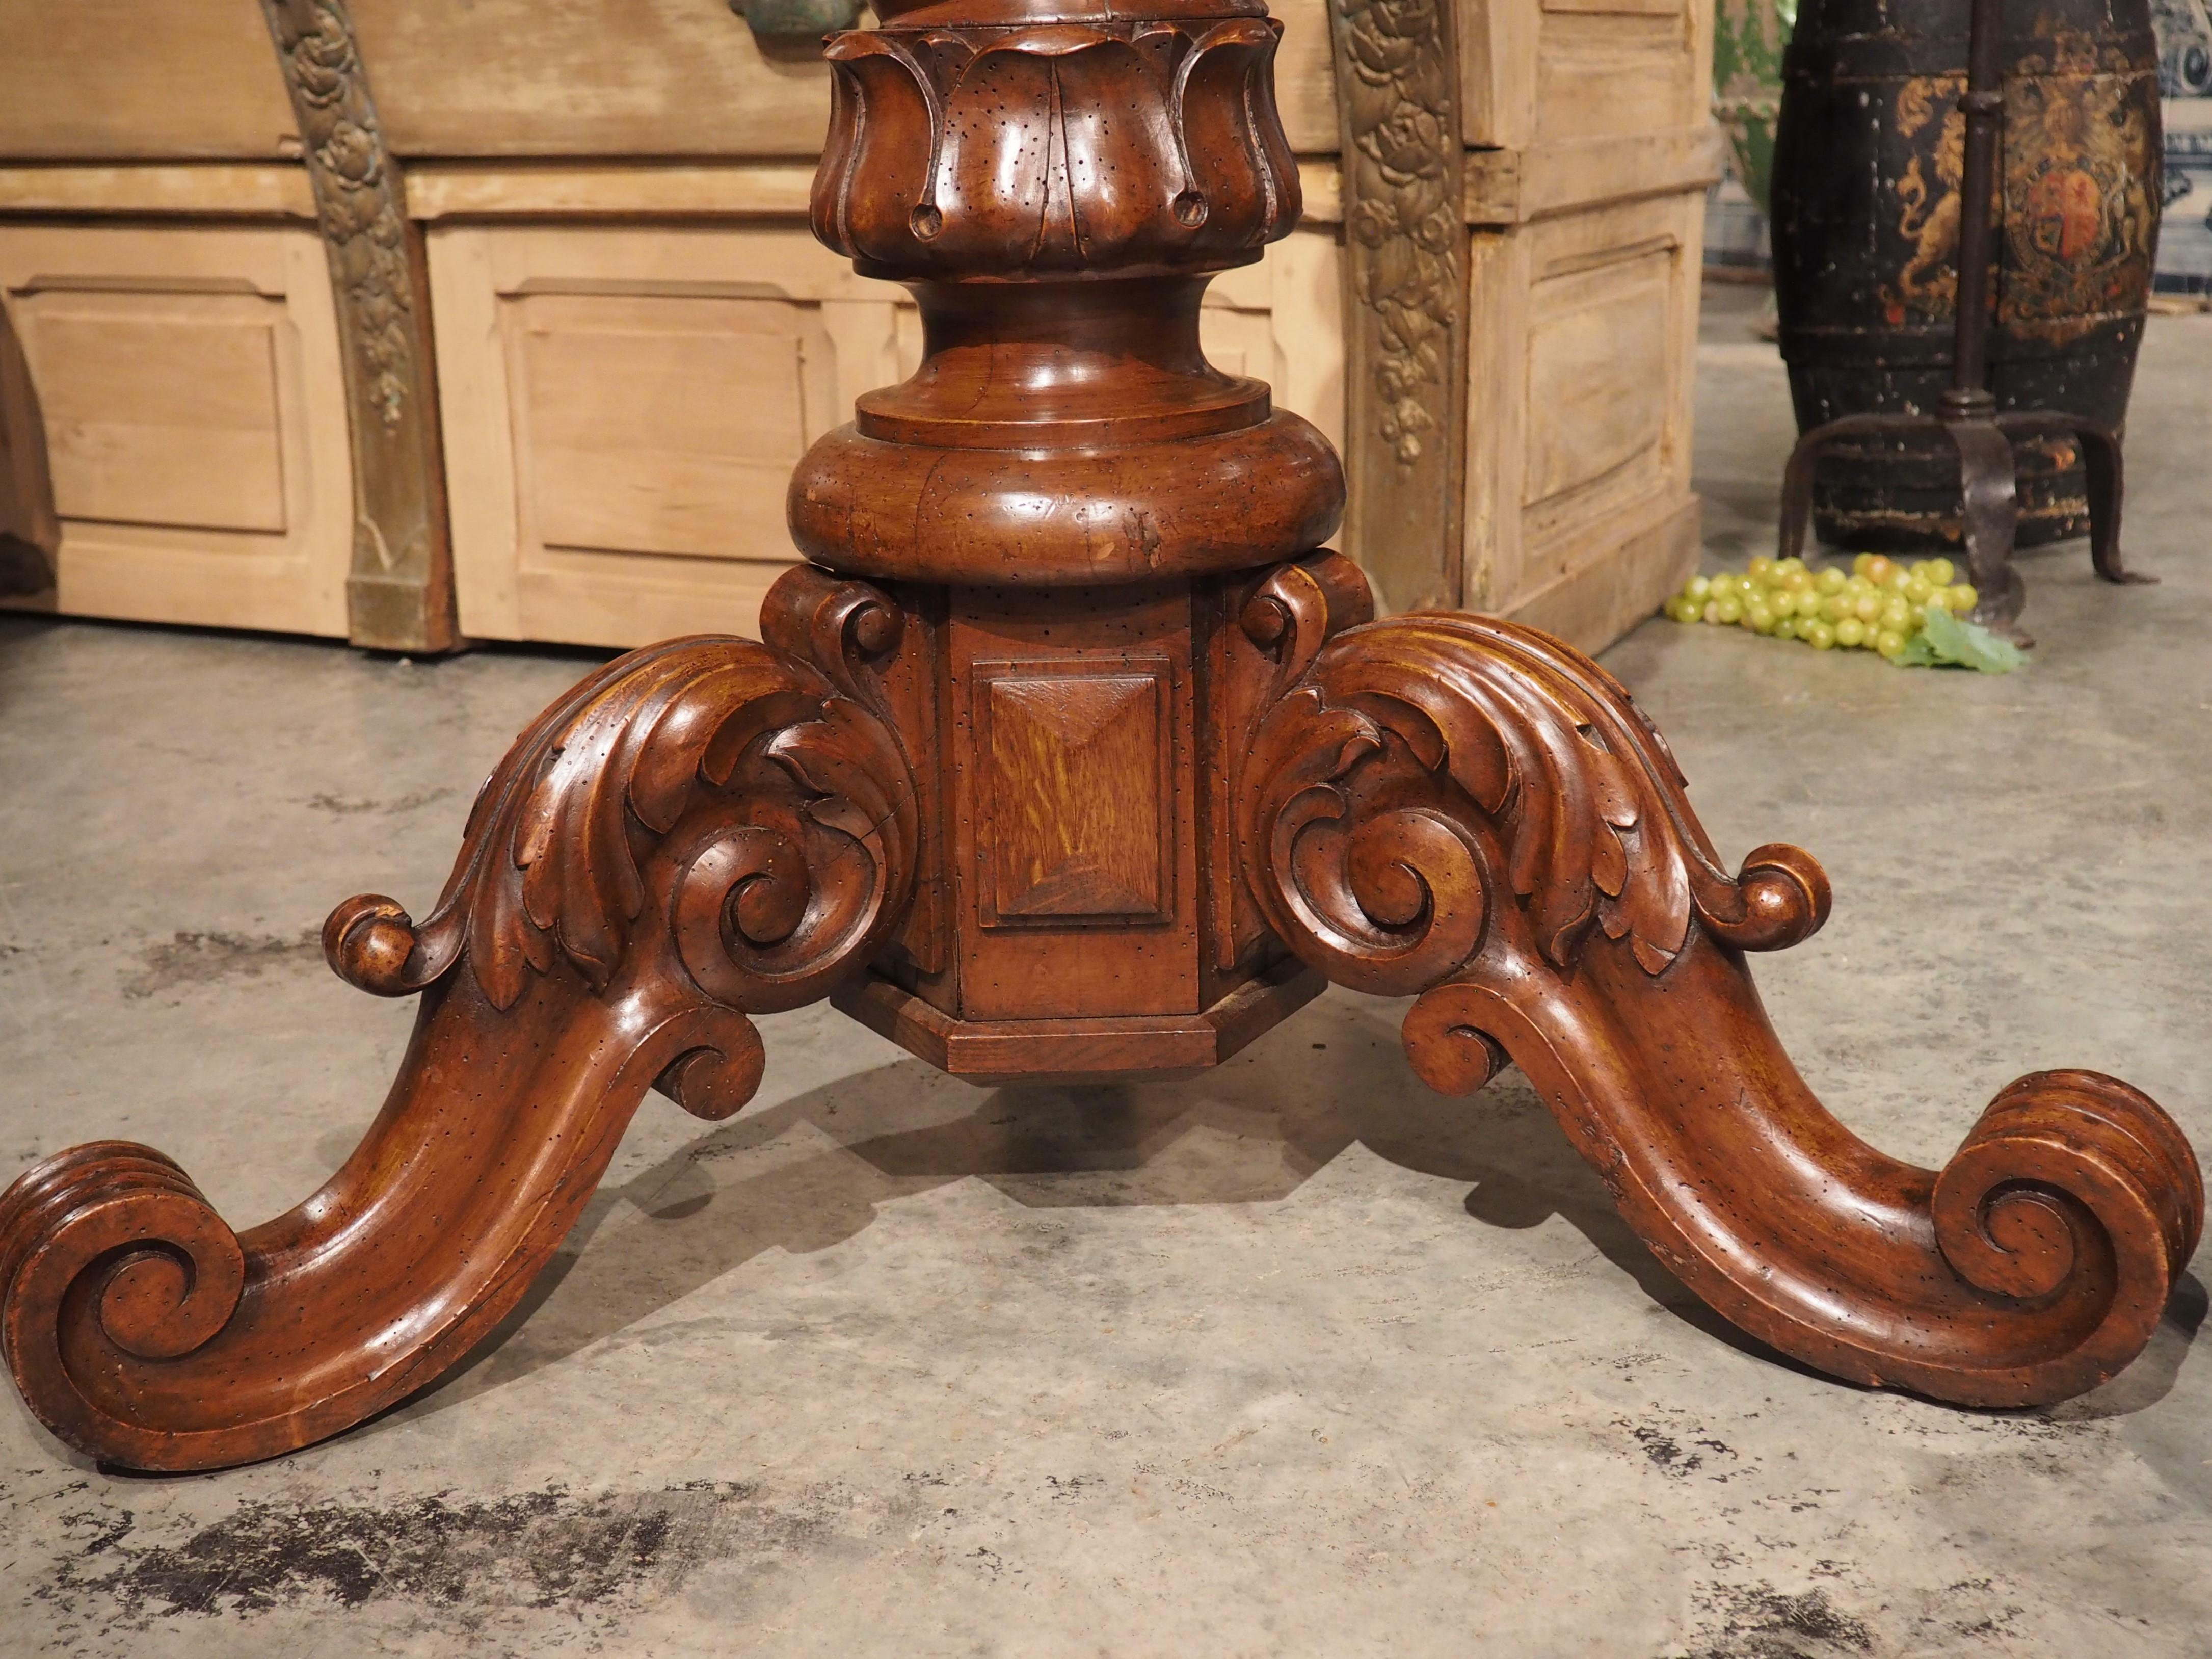 Rare Pair of Antique Wine Press Screw Sellettes in Carved Walnut, circa 1850 For Sale 3